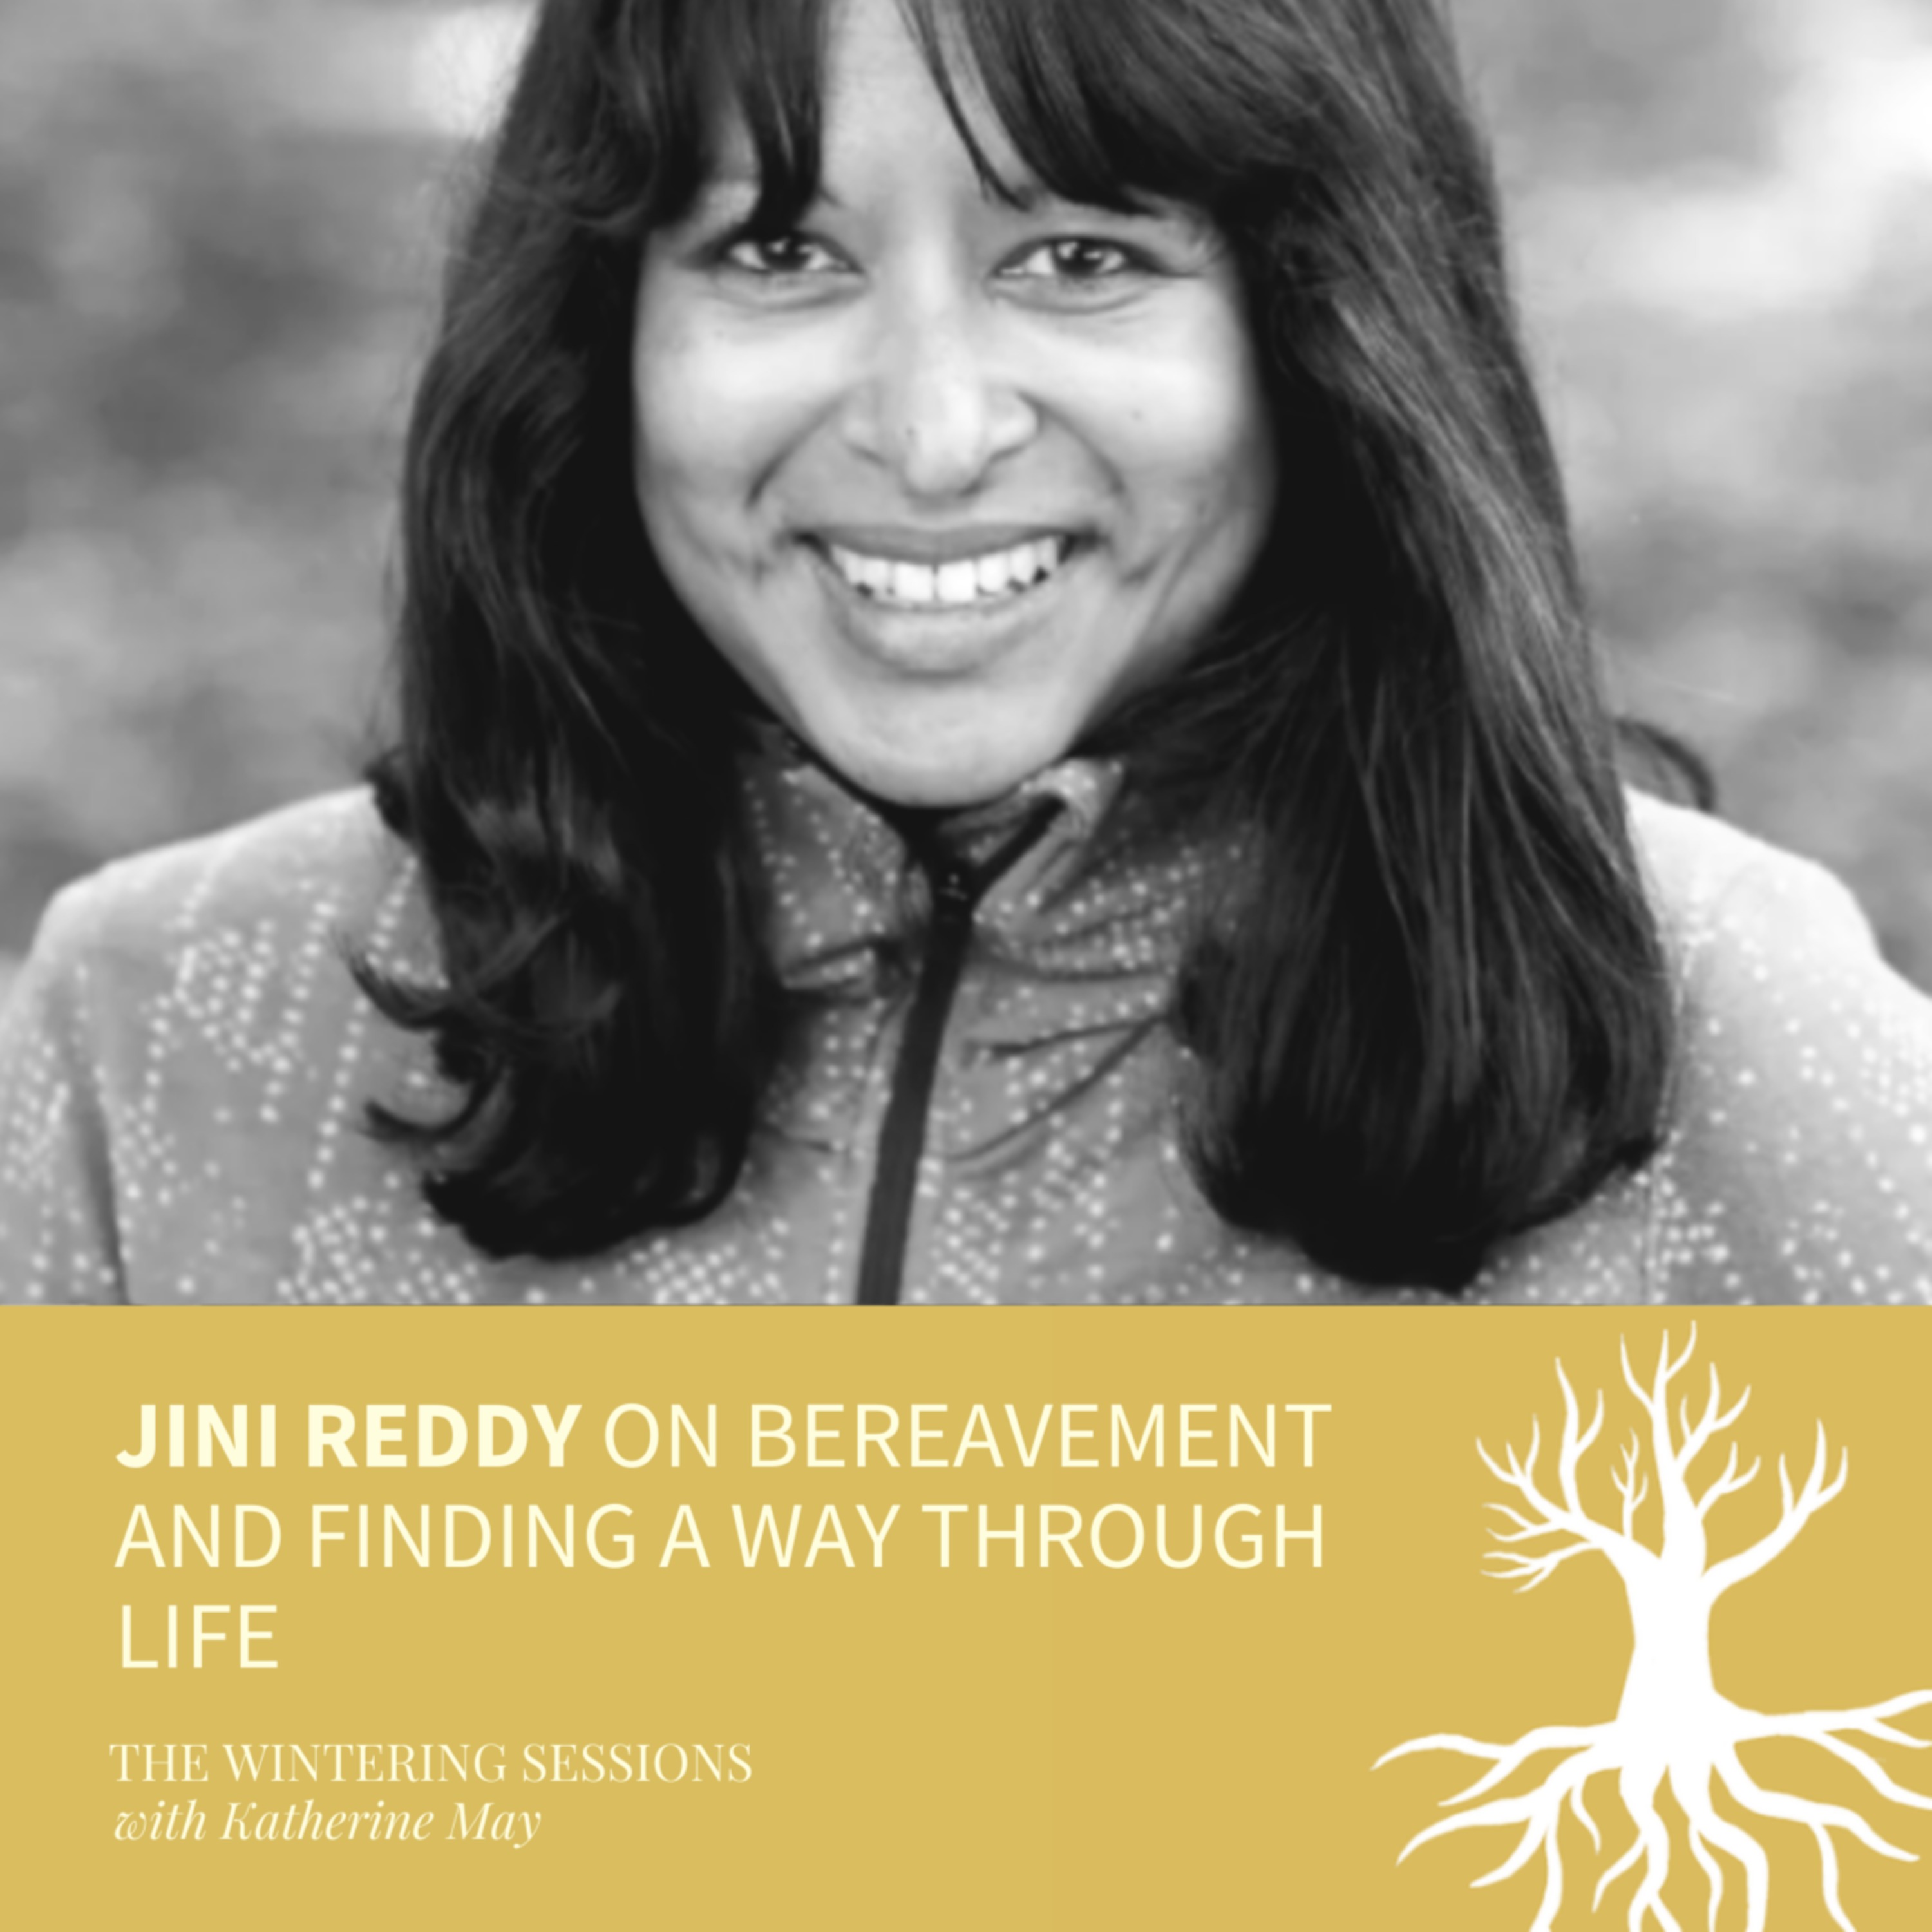 Jini Reddy on bereavement and finding a way through life